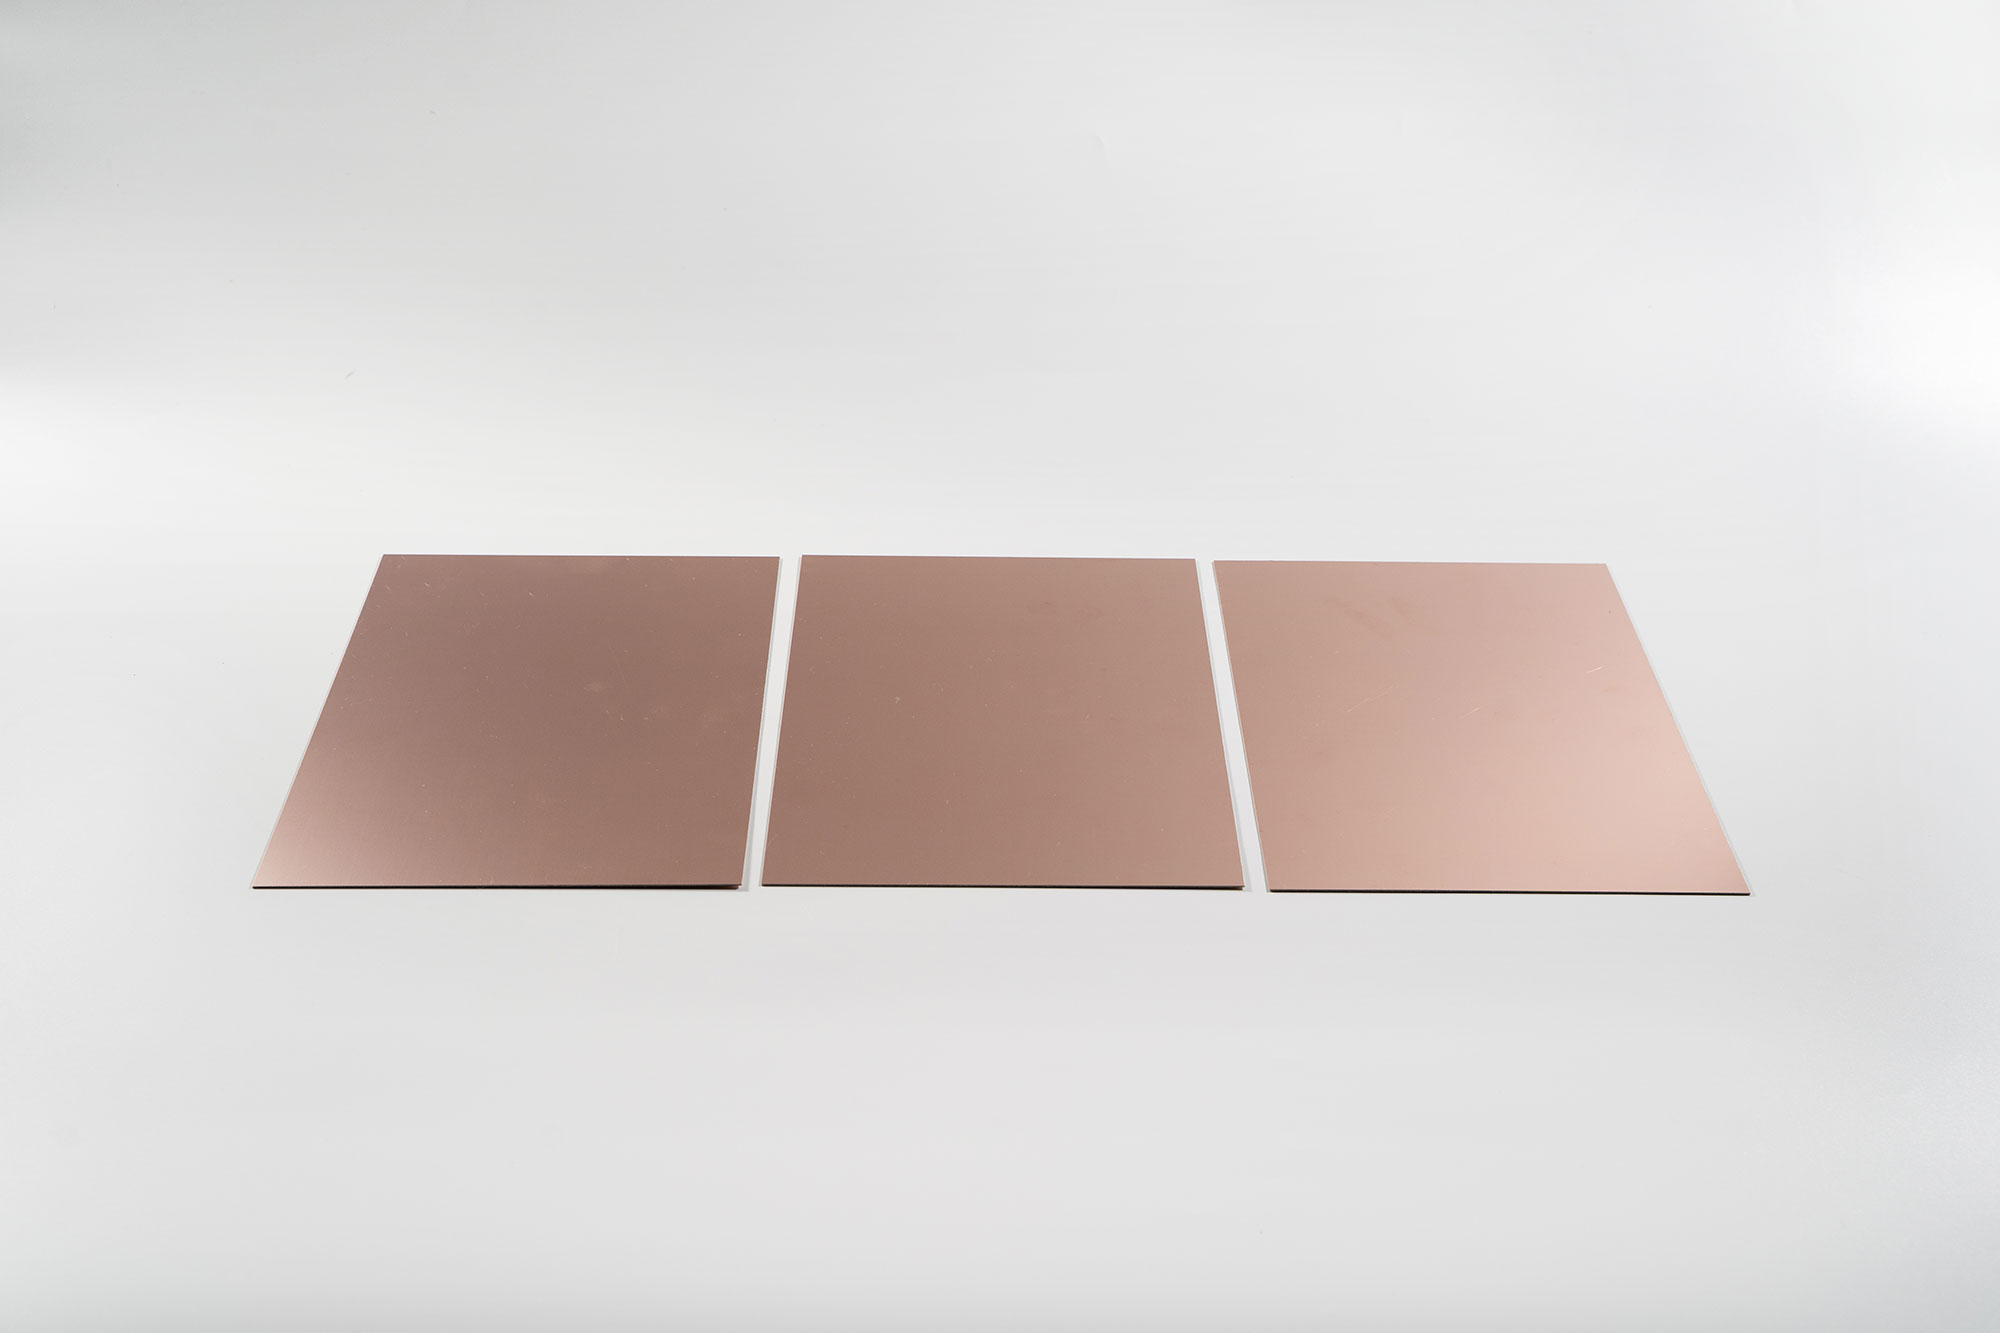 High frequency and high speed copper clad laminate (yj3000)